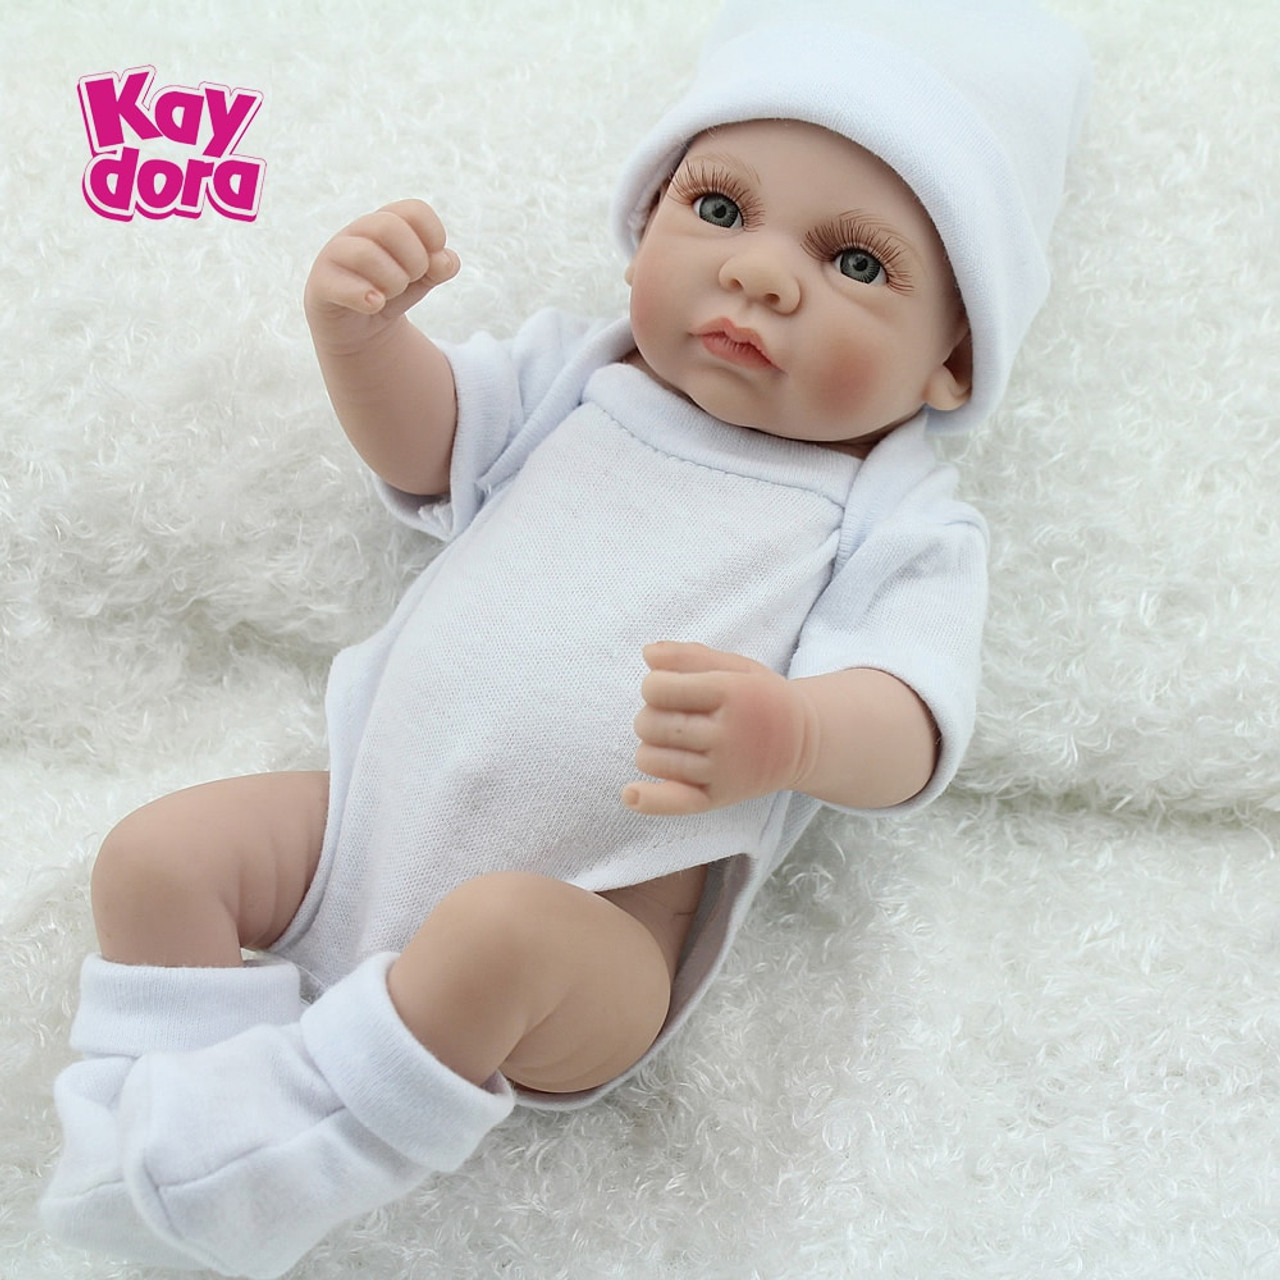 silicone baby dolls to buy